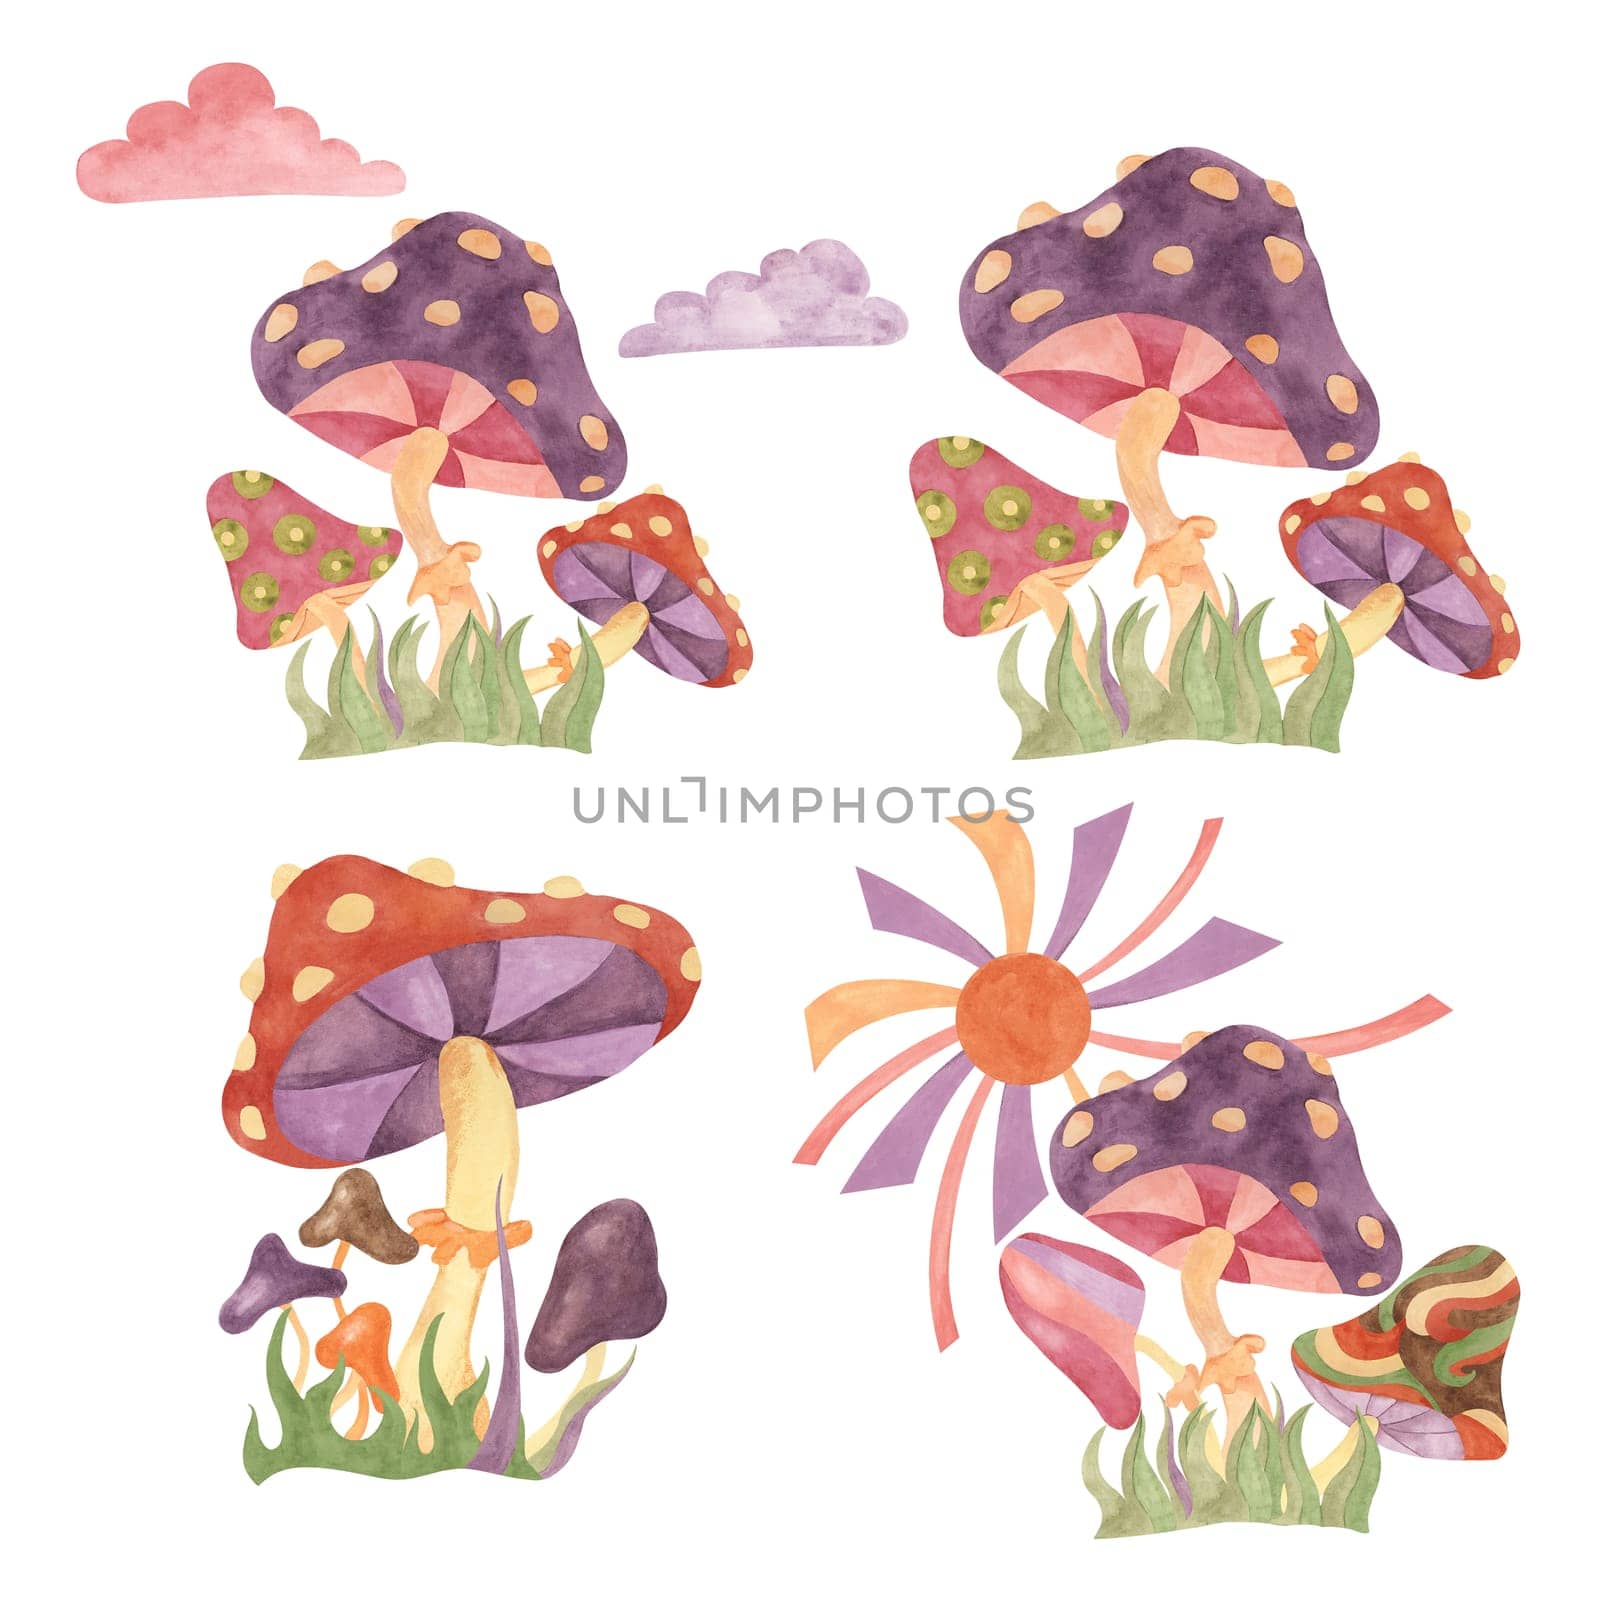 Retro hippie mushrooms, grass, sun, clouds set. Hippie psychedelic groovy fungus cliparts bunch. Watercolor groovy compositions for t-shirt printing by Fofito